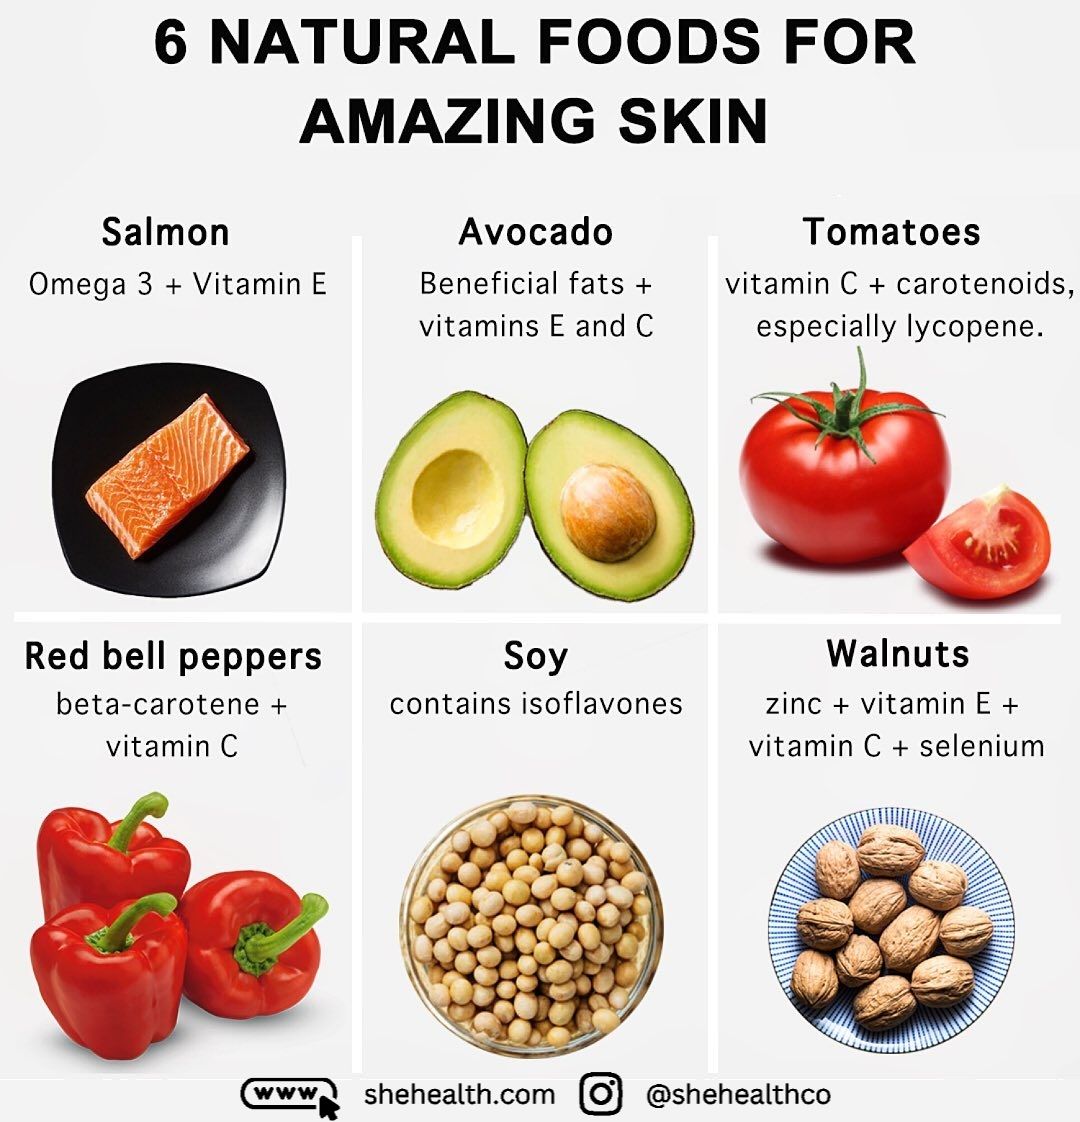 6 Foods for Amazing Skin: How to Nourish Your Skin from the Inside Out